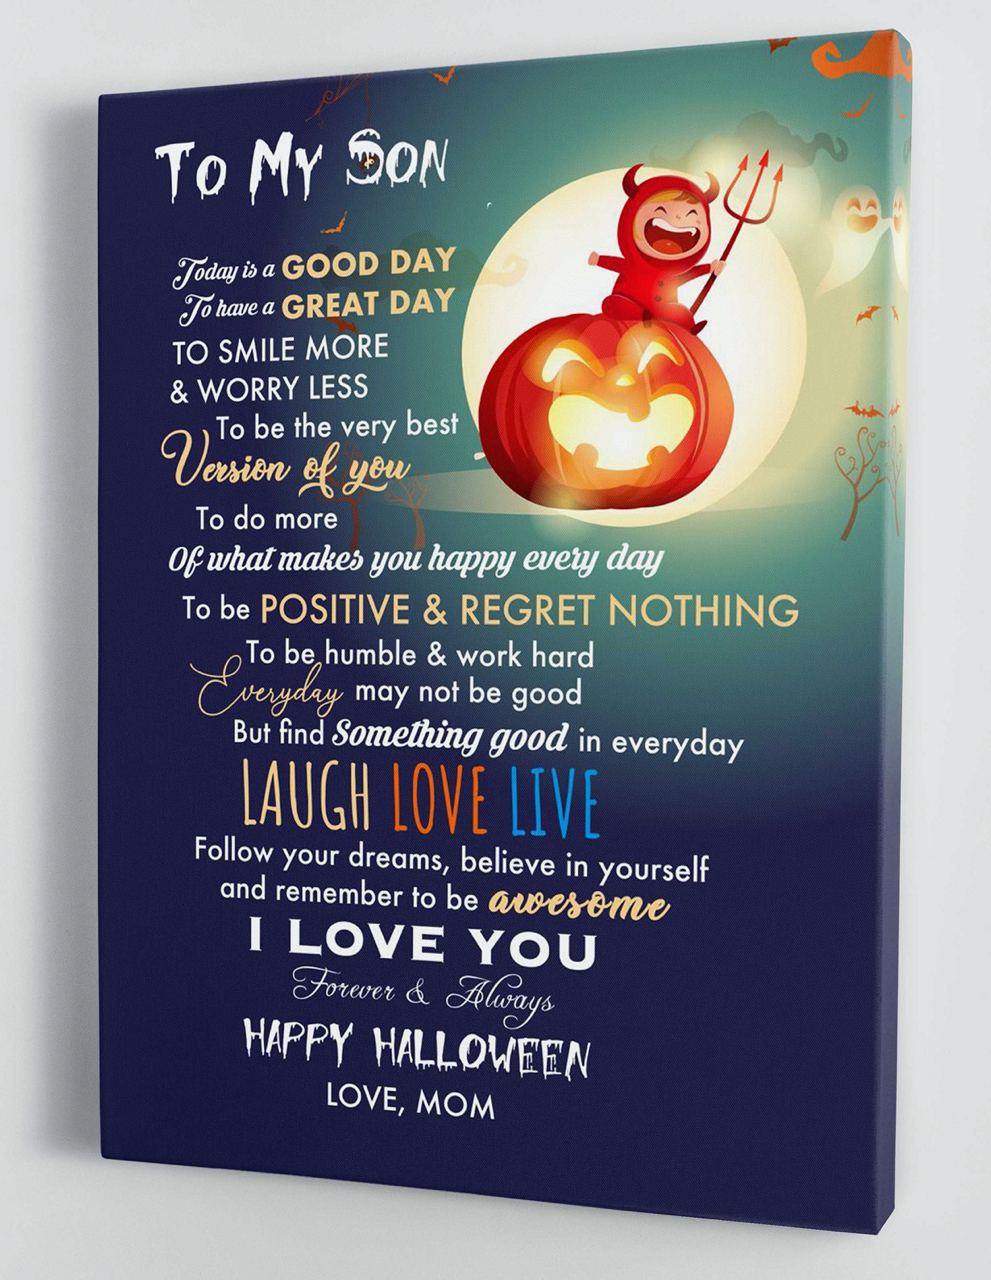 To My Son - From Mom - Halloween Canvas Gift MS052 - DivesArt LLC